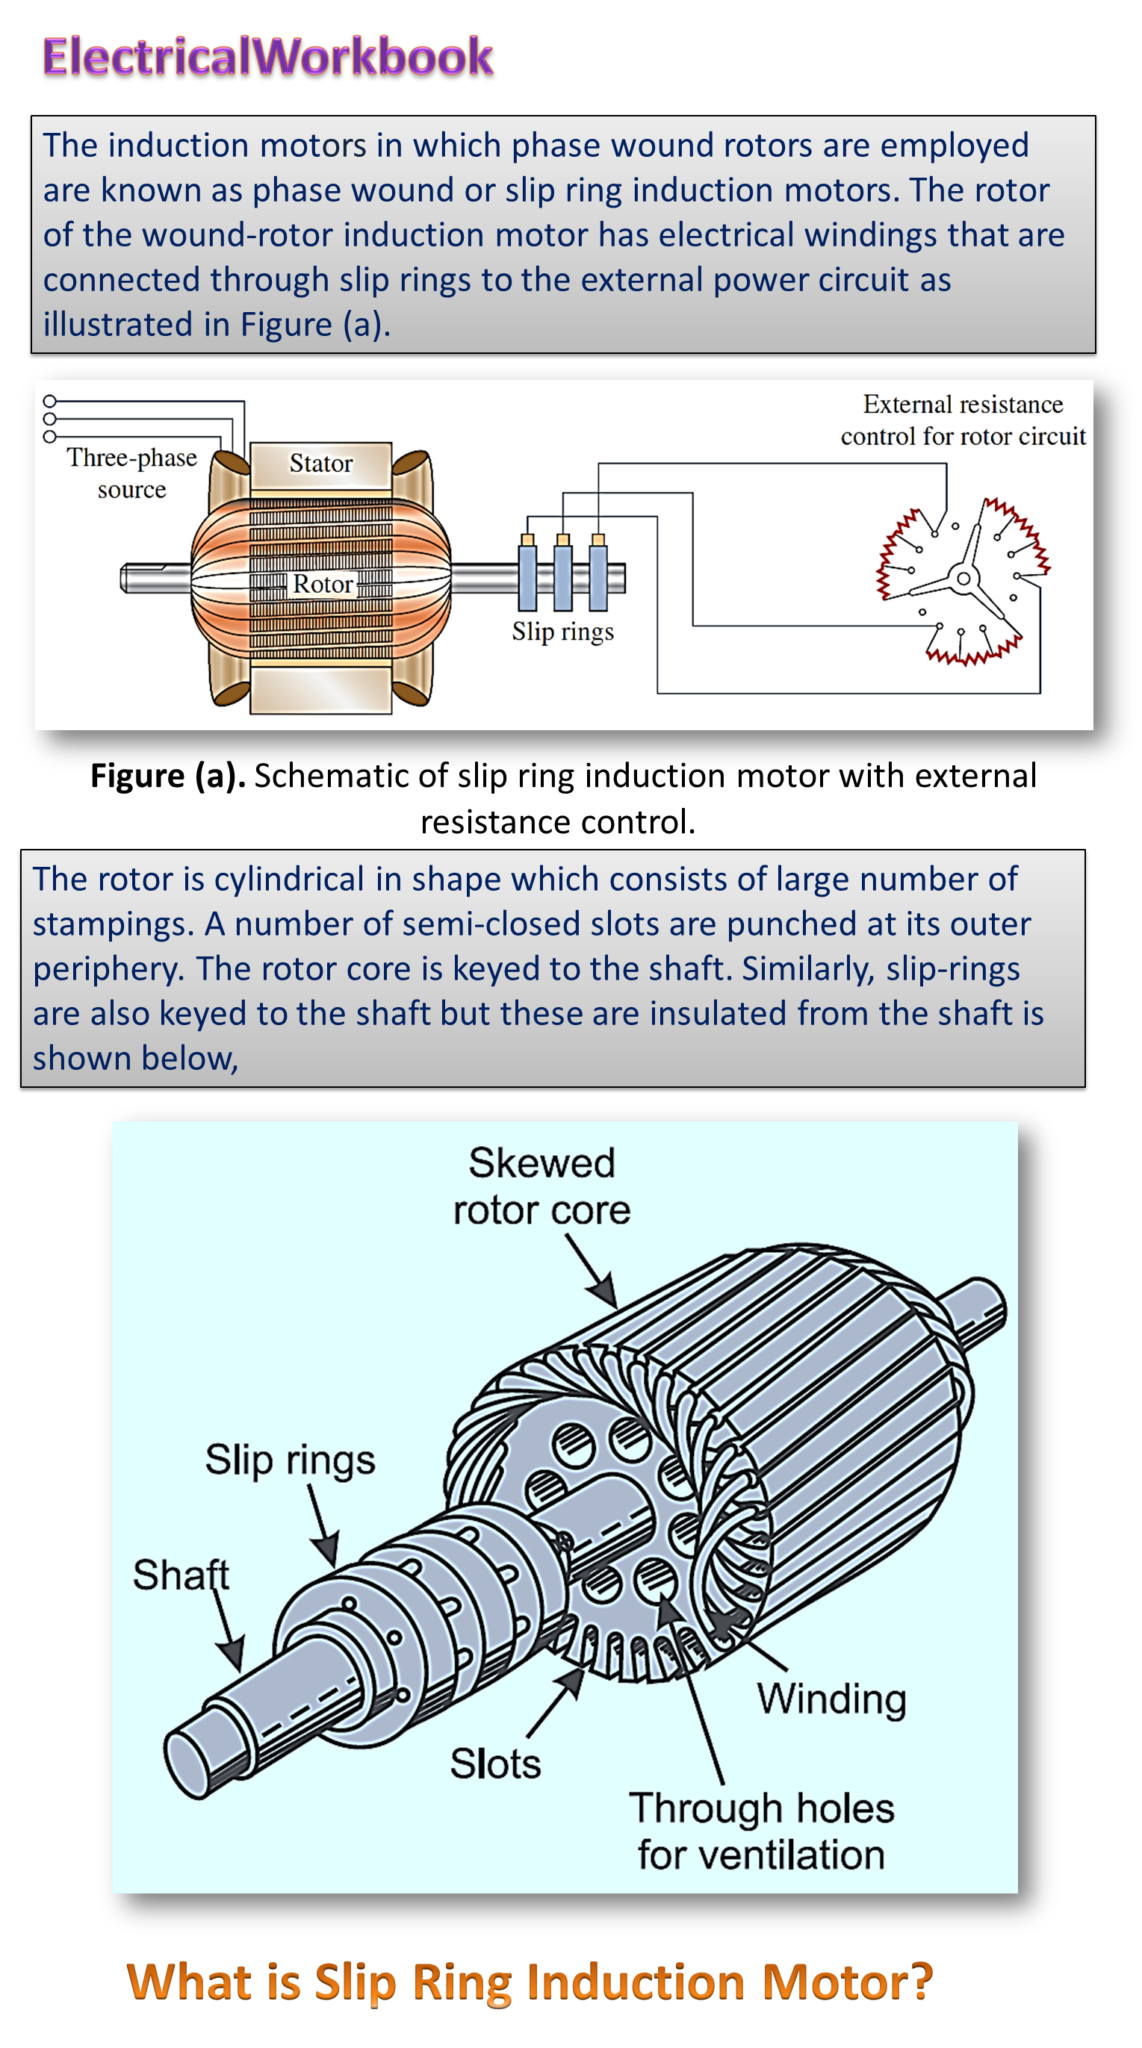 Shah crack bond What is Slip Ring Induction Motor? Working Principle, Construction,  Diagram, Applications & Advantages - ElectricalWorkbook